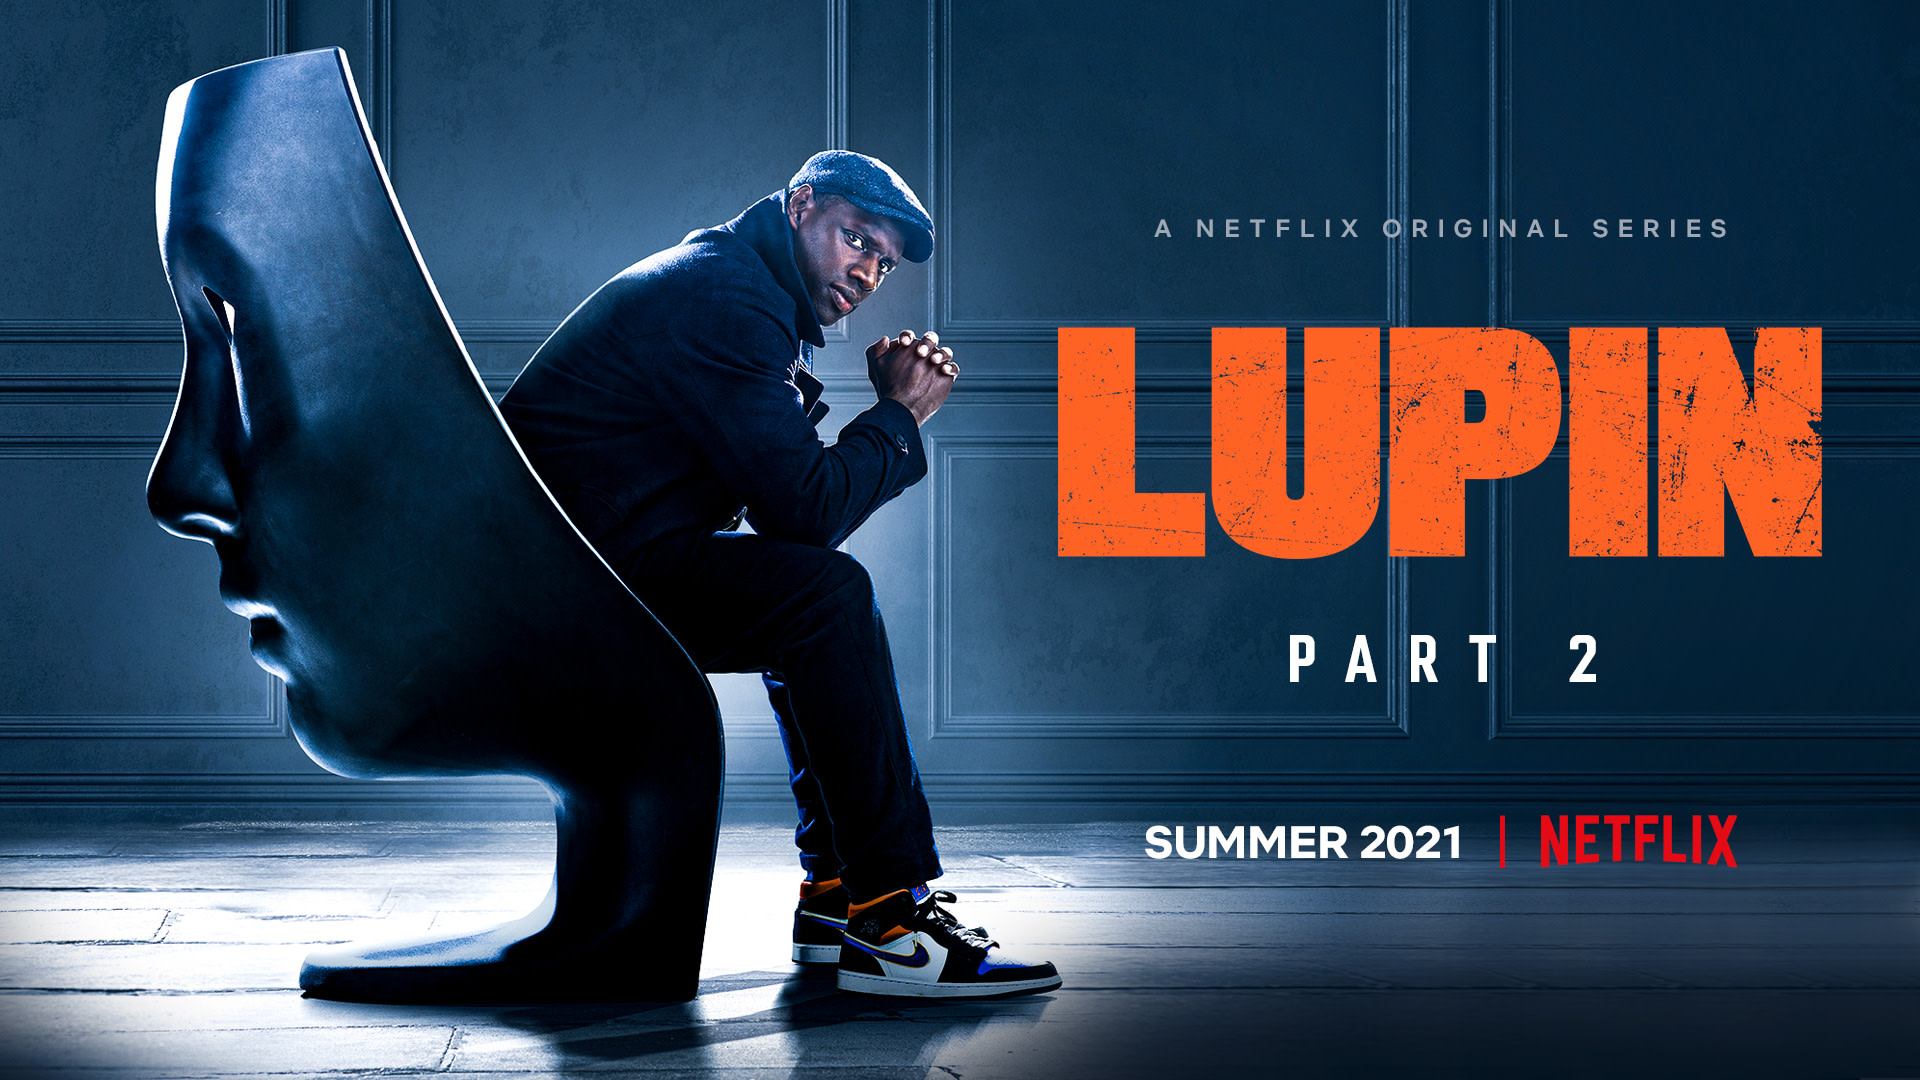 Netflix Today Confirms Original French Series 'Lupin' Will Return Summer 2021